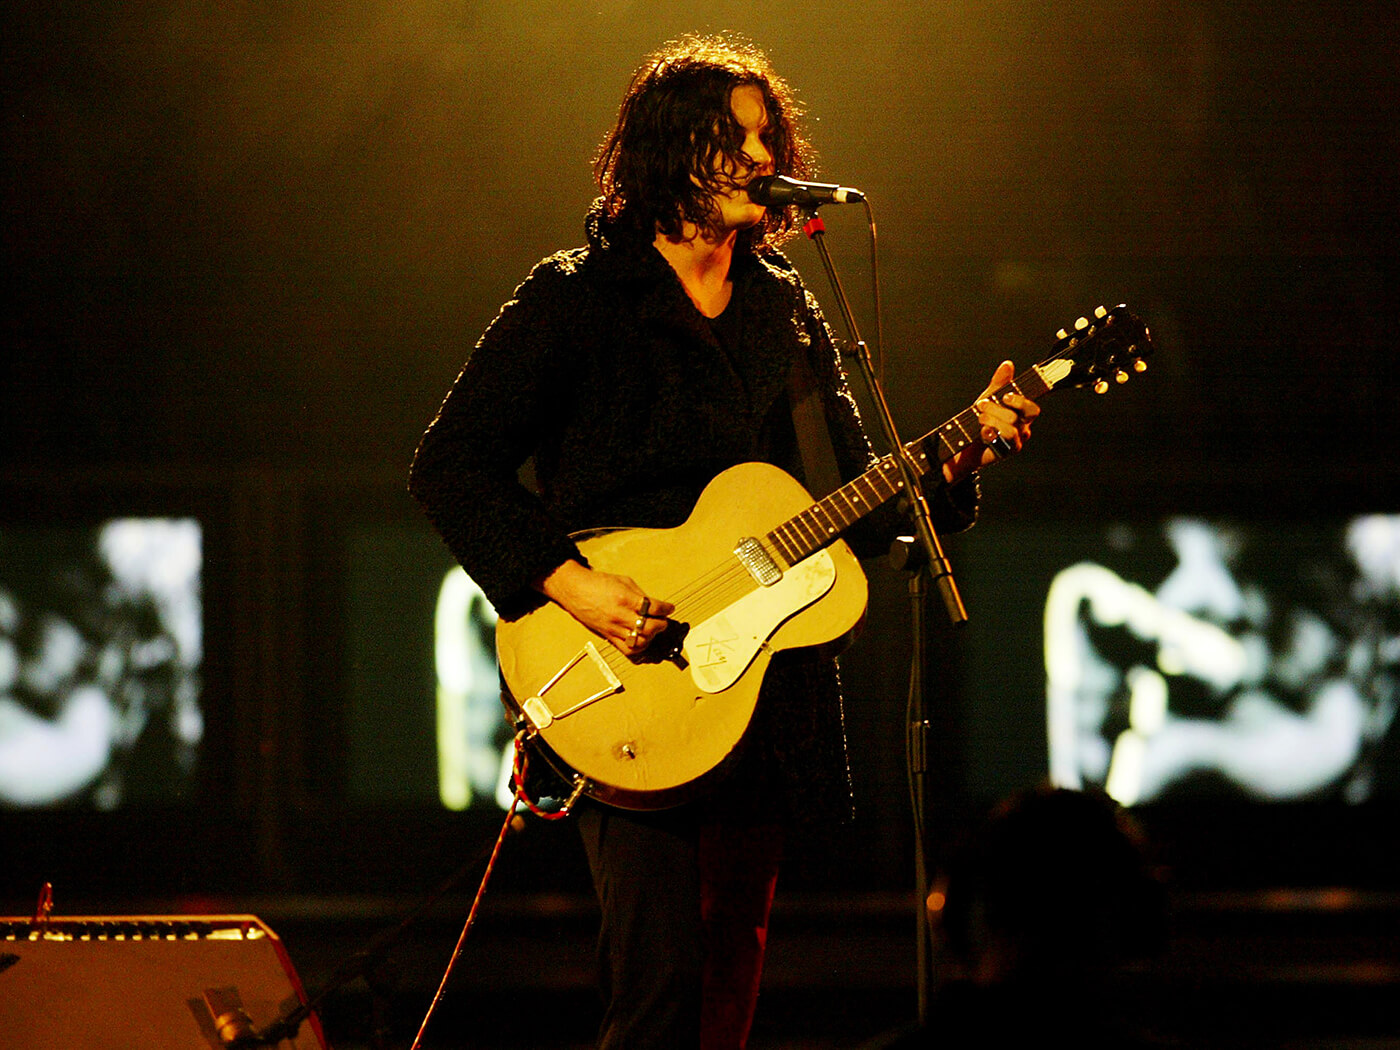 Jack White of The White Stripes performing in 2003 by Getty Images